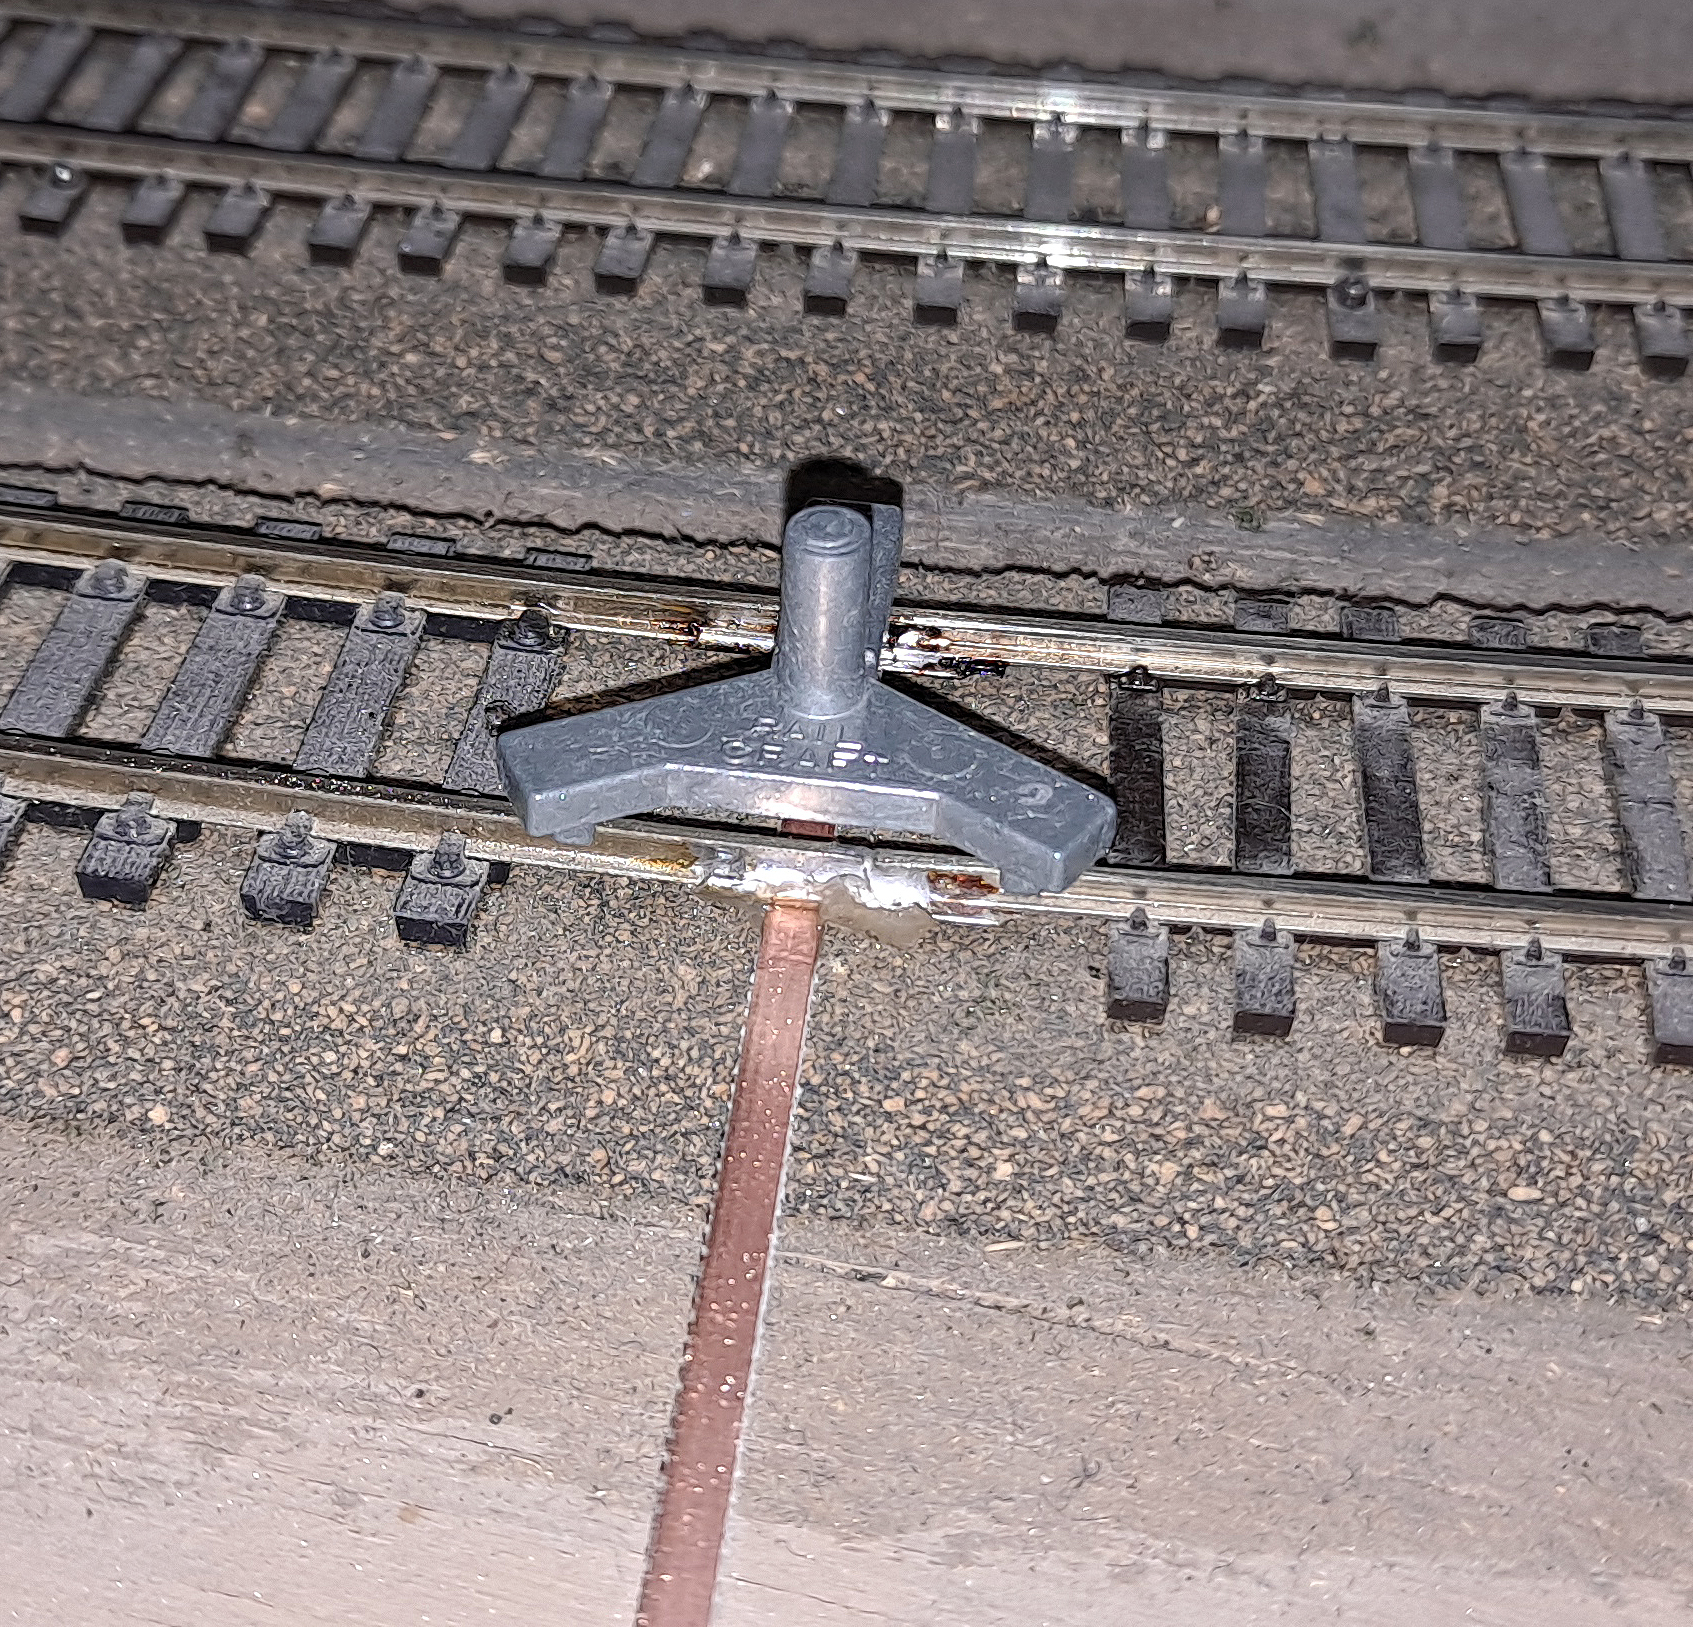 A three-point die-cast metal rail gauge sits above the rail joint.